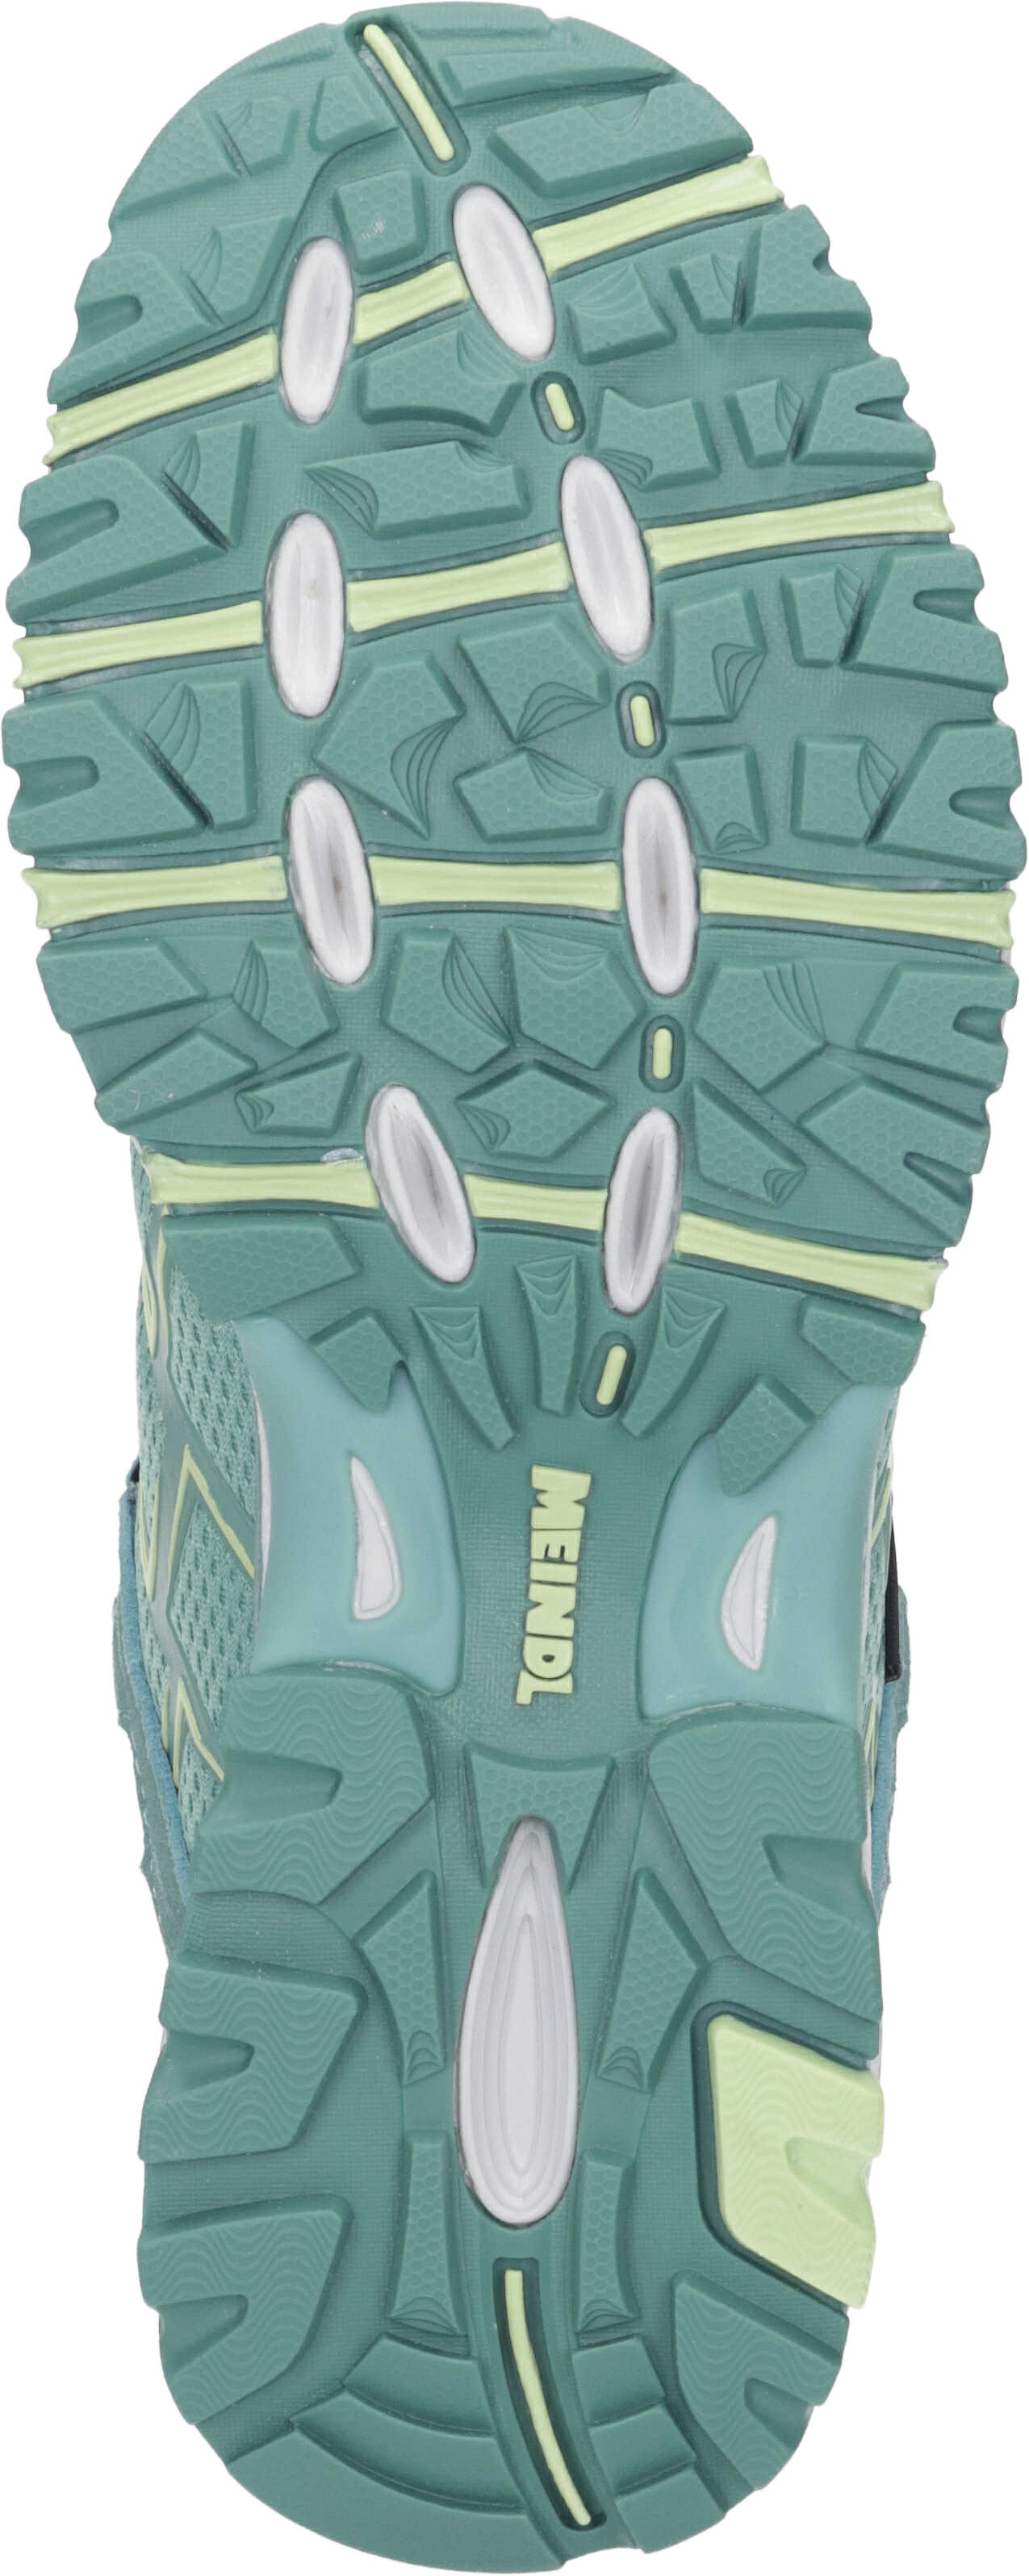 Caribe Lady GTX Meindl Outdoor